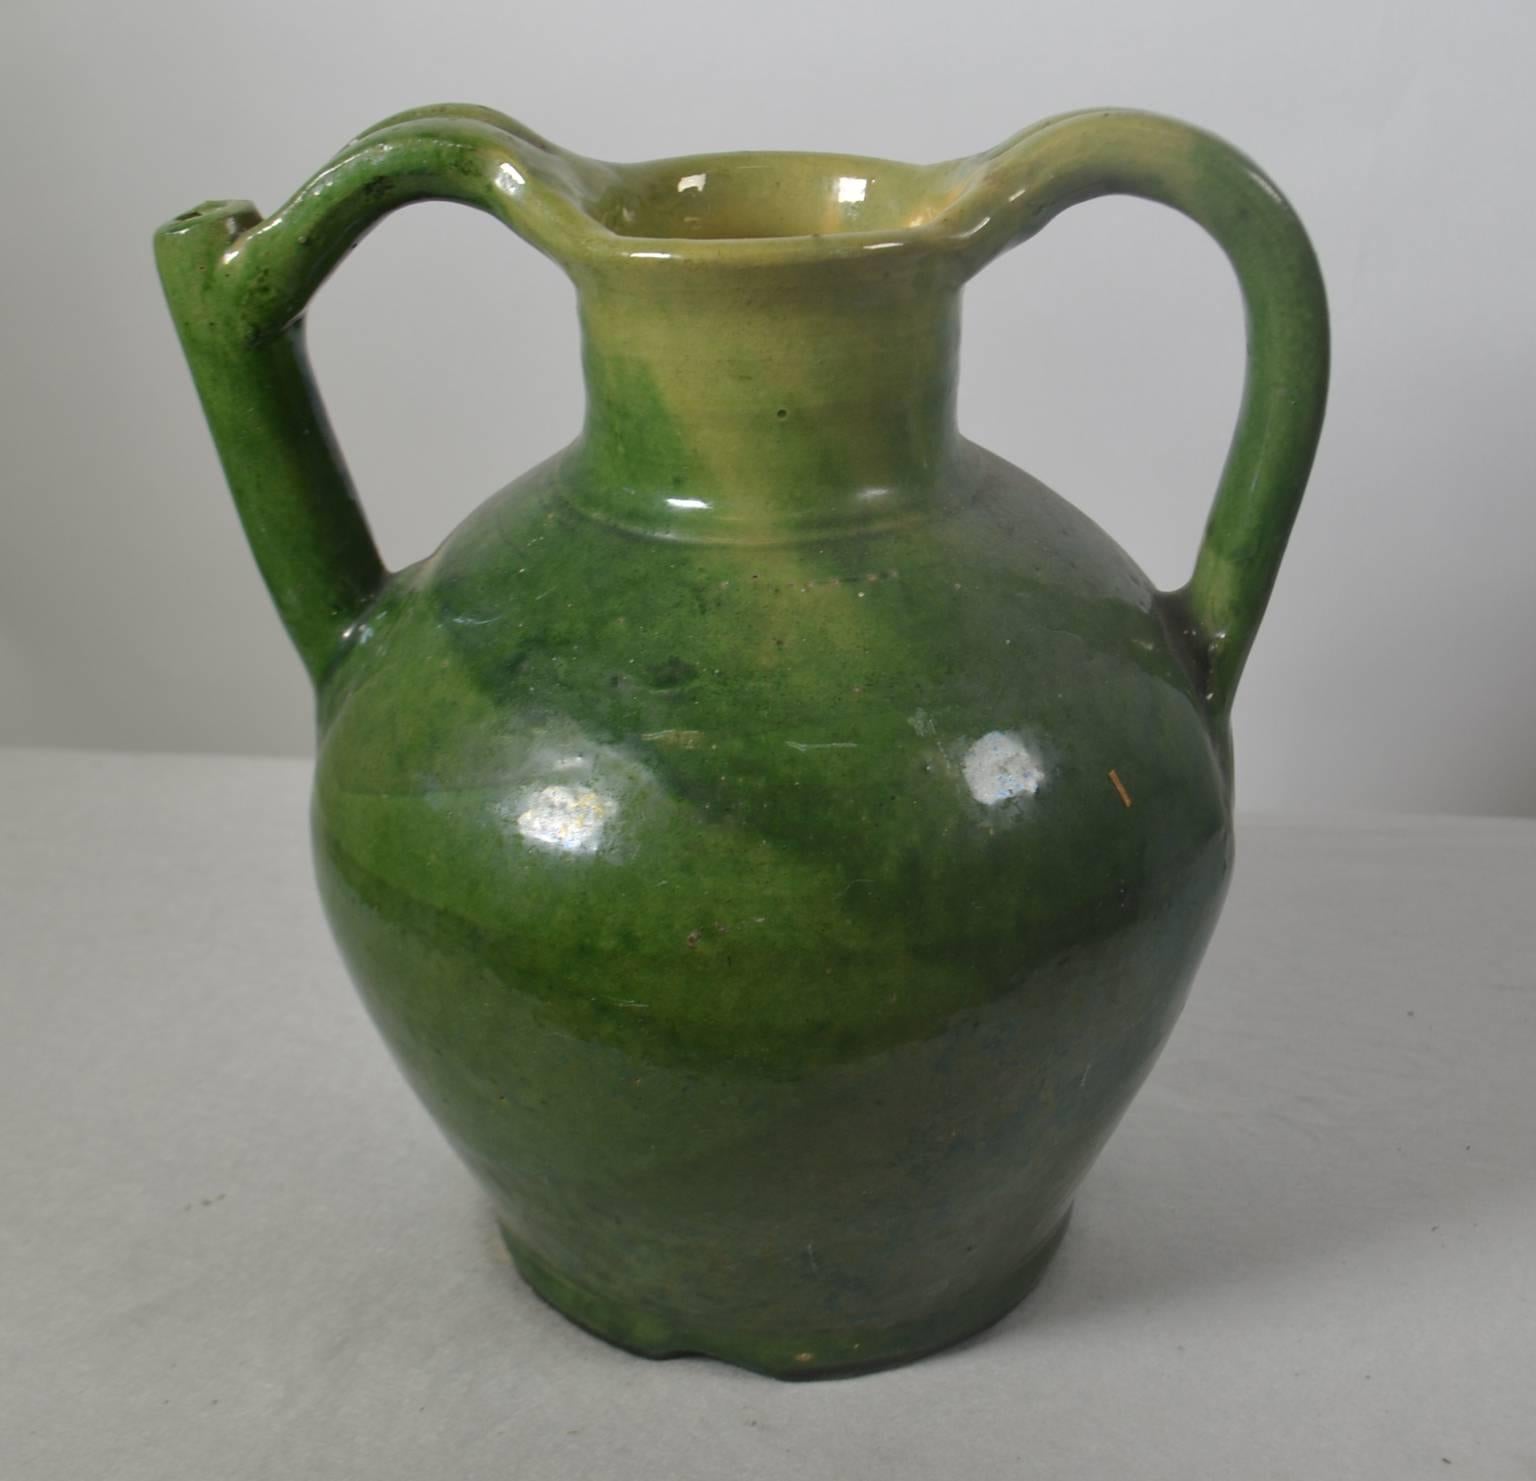 Terracotta jug with spout in handle. Green glaze, circa 1860. Once a common piece of pottery used daily in French kitchens, these earthenware jugs have become showcase pieces sought by designers and collectors. These beautiful vessels offer a depth